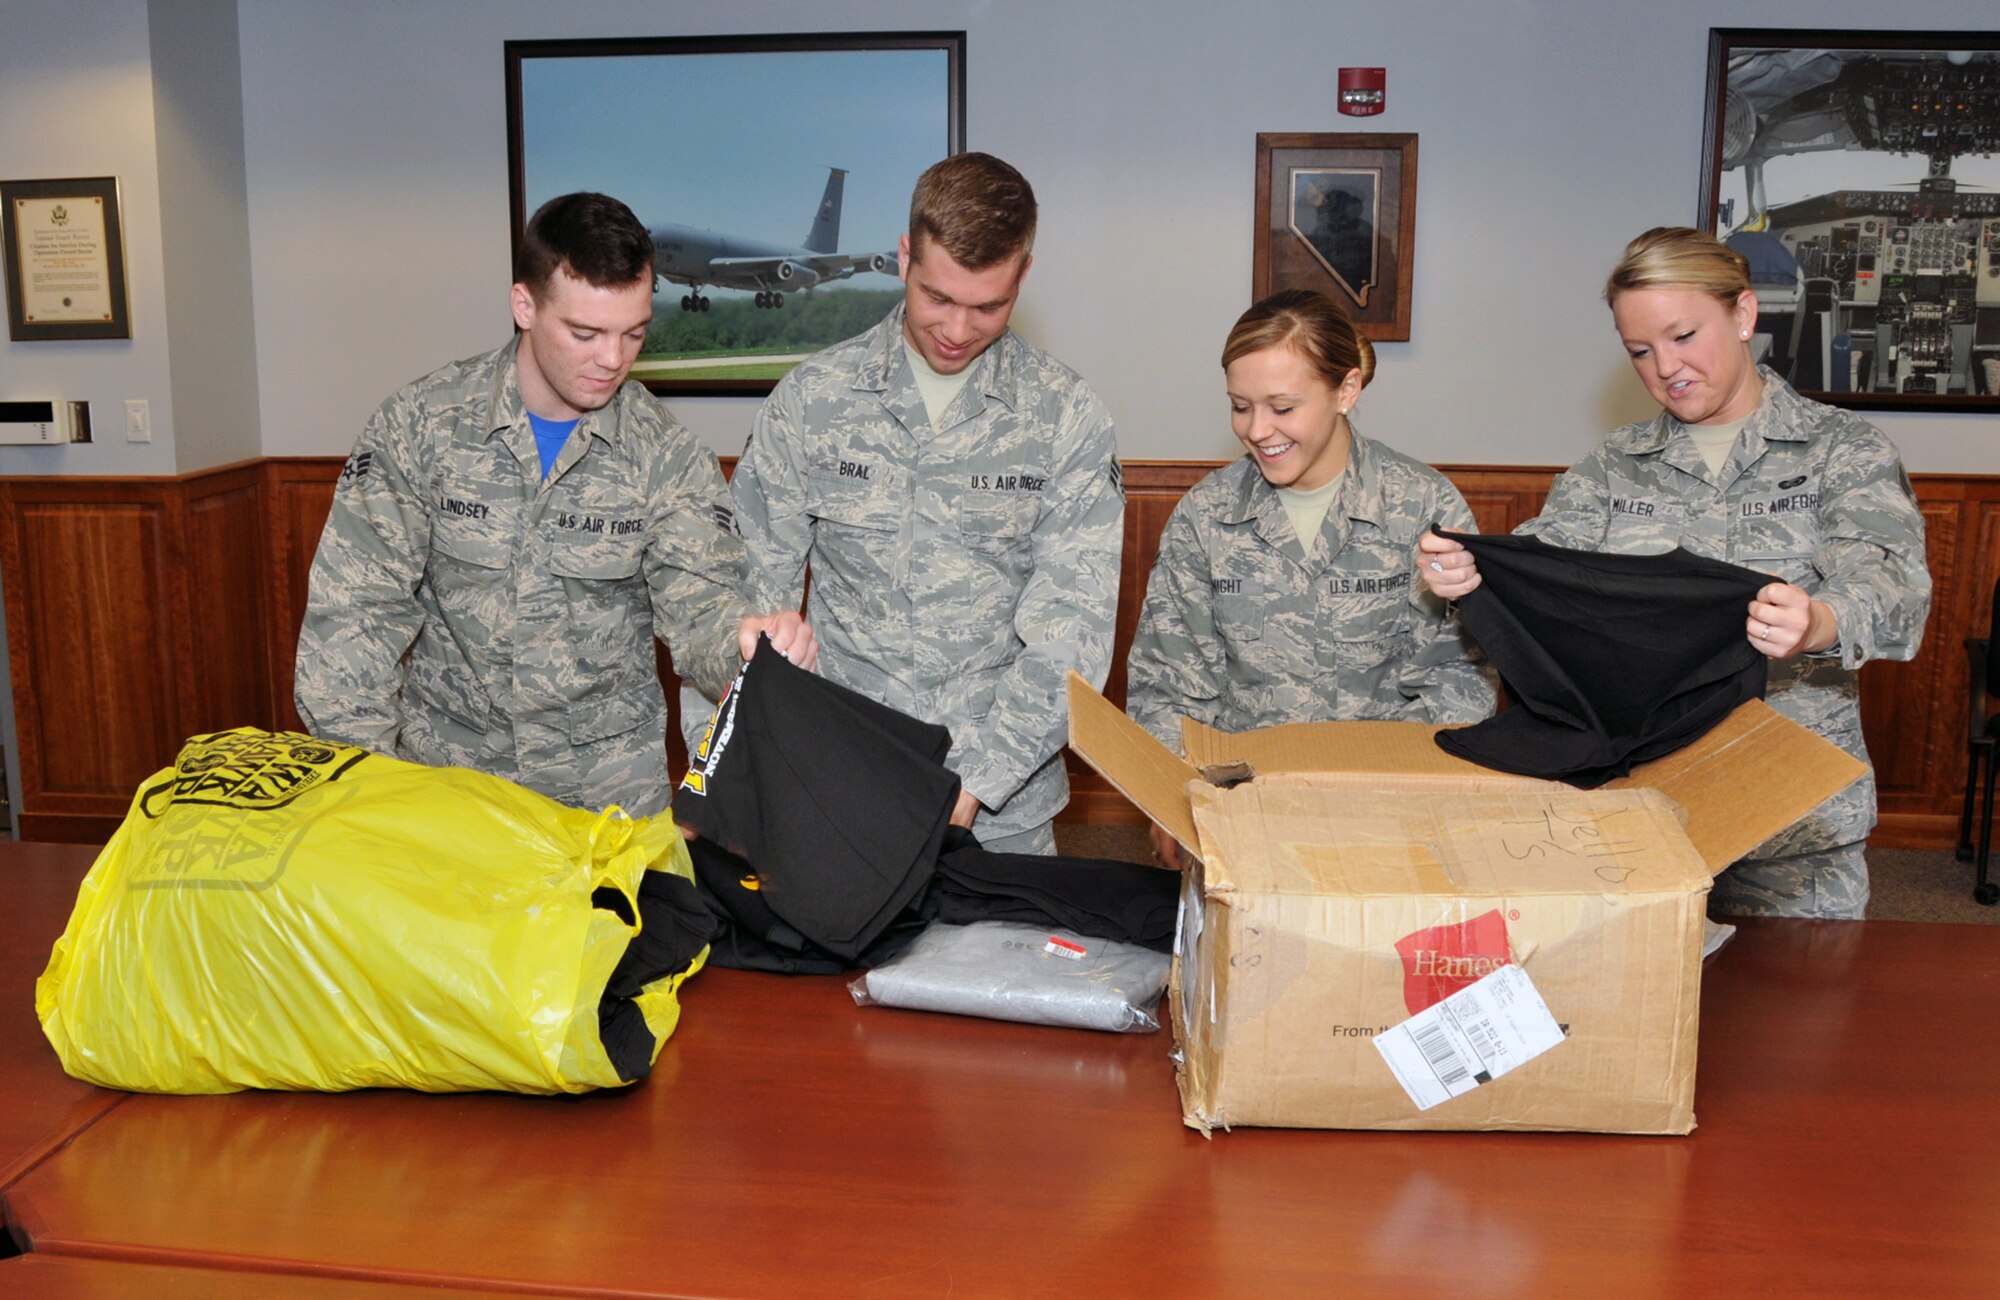 Members of the 185 Air Refueling Wing Junior Enlisted Council (JEC) box up shirts in a classroom at the base in Sioux City, Iowa on Sunday, March 8, 2015. The members of the JEC are collecting donated clothes for the Wounded Warrior Project to help out wounded military members at the Landstuhl hospital in Germany.  (U.S. Air National Guard photo by TSgt. Bill Wiseman/Released)